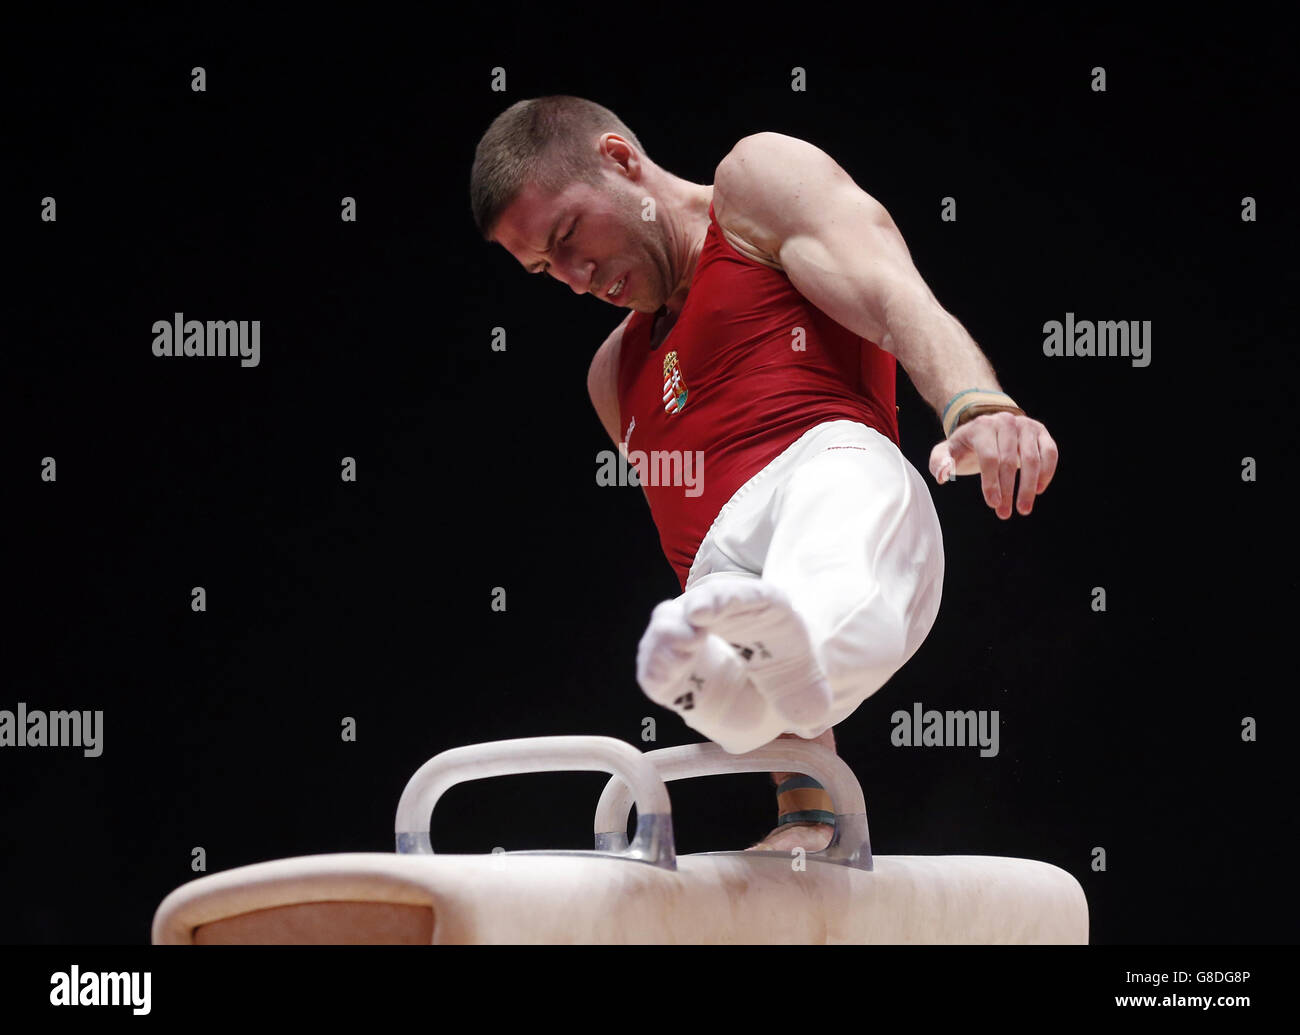 Gymnastics - 2015 World Championships - Day Four - The SSE Hydro. Hungary's Krisztian Berki competes on the Pommel Horse during day four of the 2015 World Gymnastic Championships at The SSE Hydro, Glasgow. Stock Photo